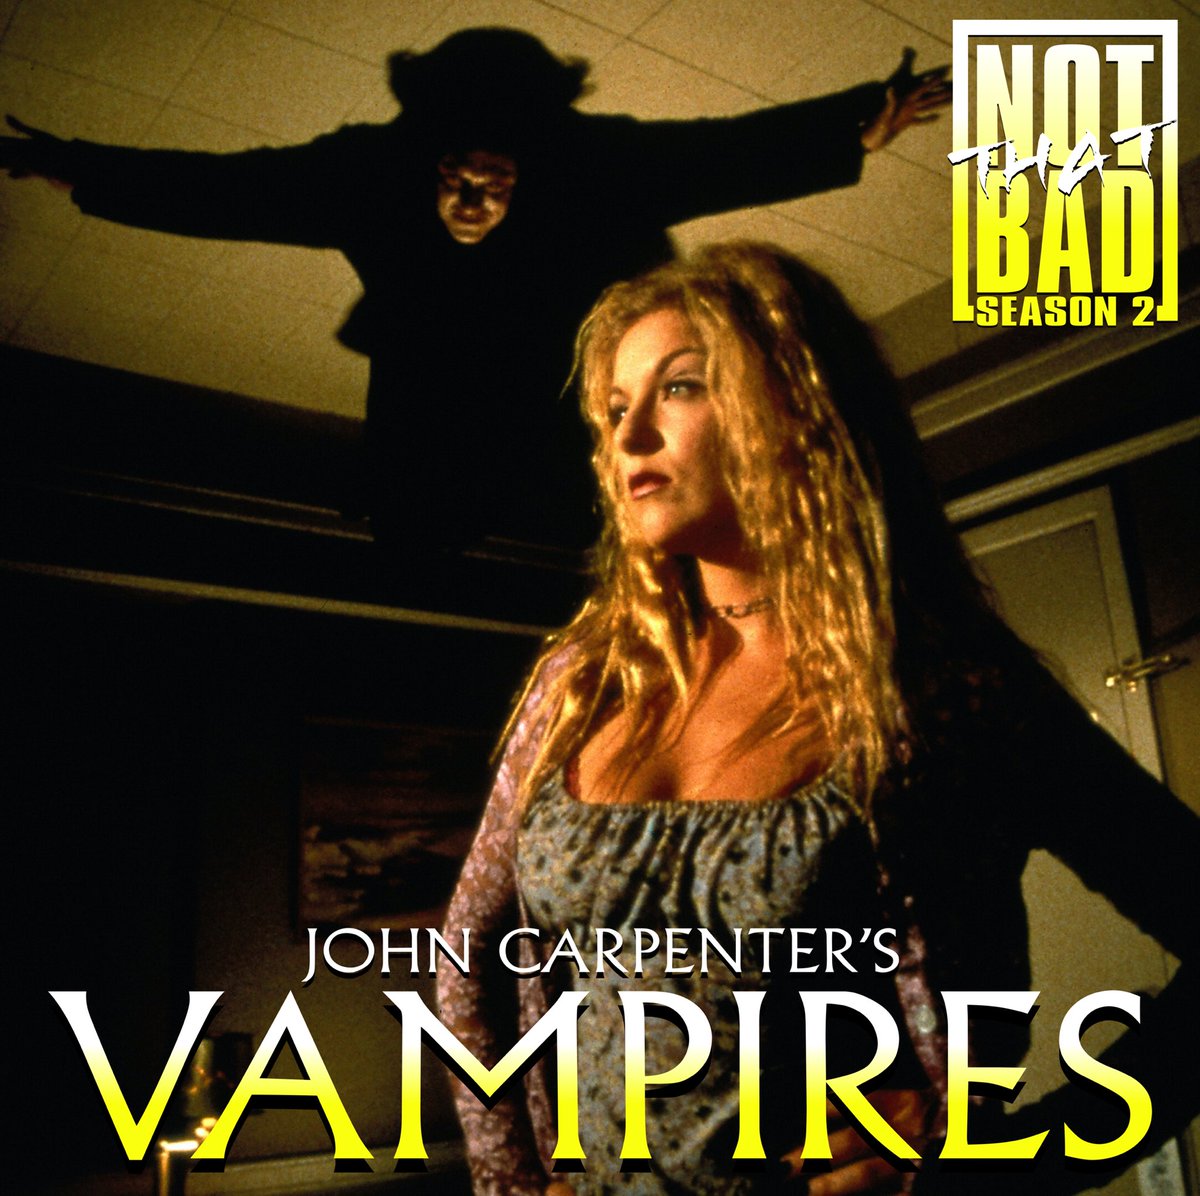 A brand new episode of Not That Bad has just DROPPED, this time covering John Carpenter’s Vampires!

open.spotify.com/episode/44WwDk…

podcasts.apple.com/us/podcast/not…

youtu.be/z5W-wVfbhlg?si…

#Vampires #JohnCarpenter #horror #podcast #notthatbad